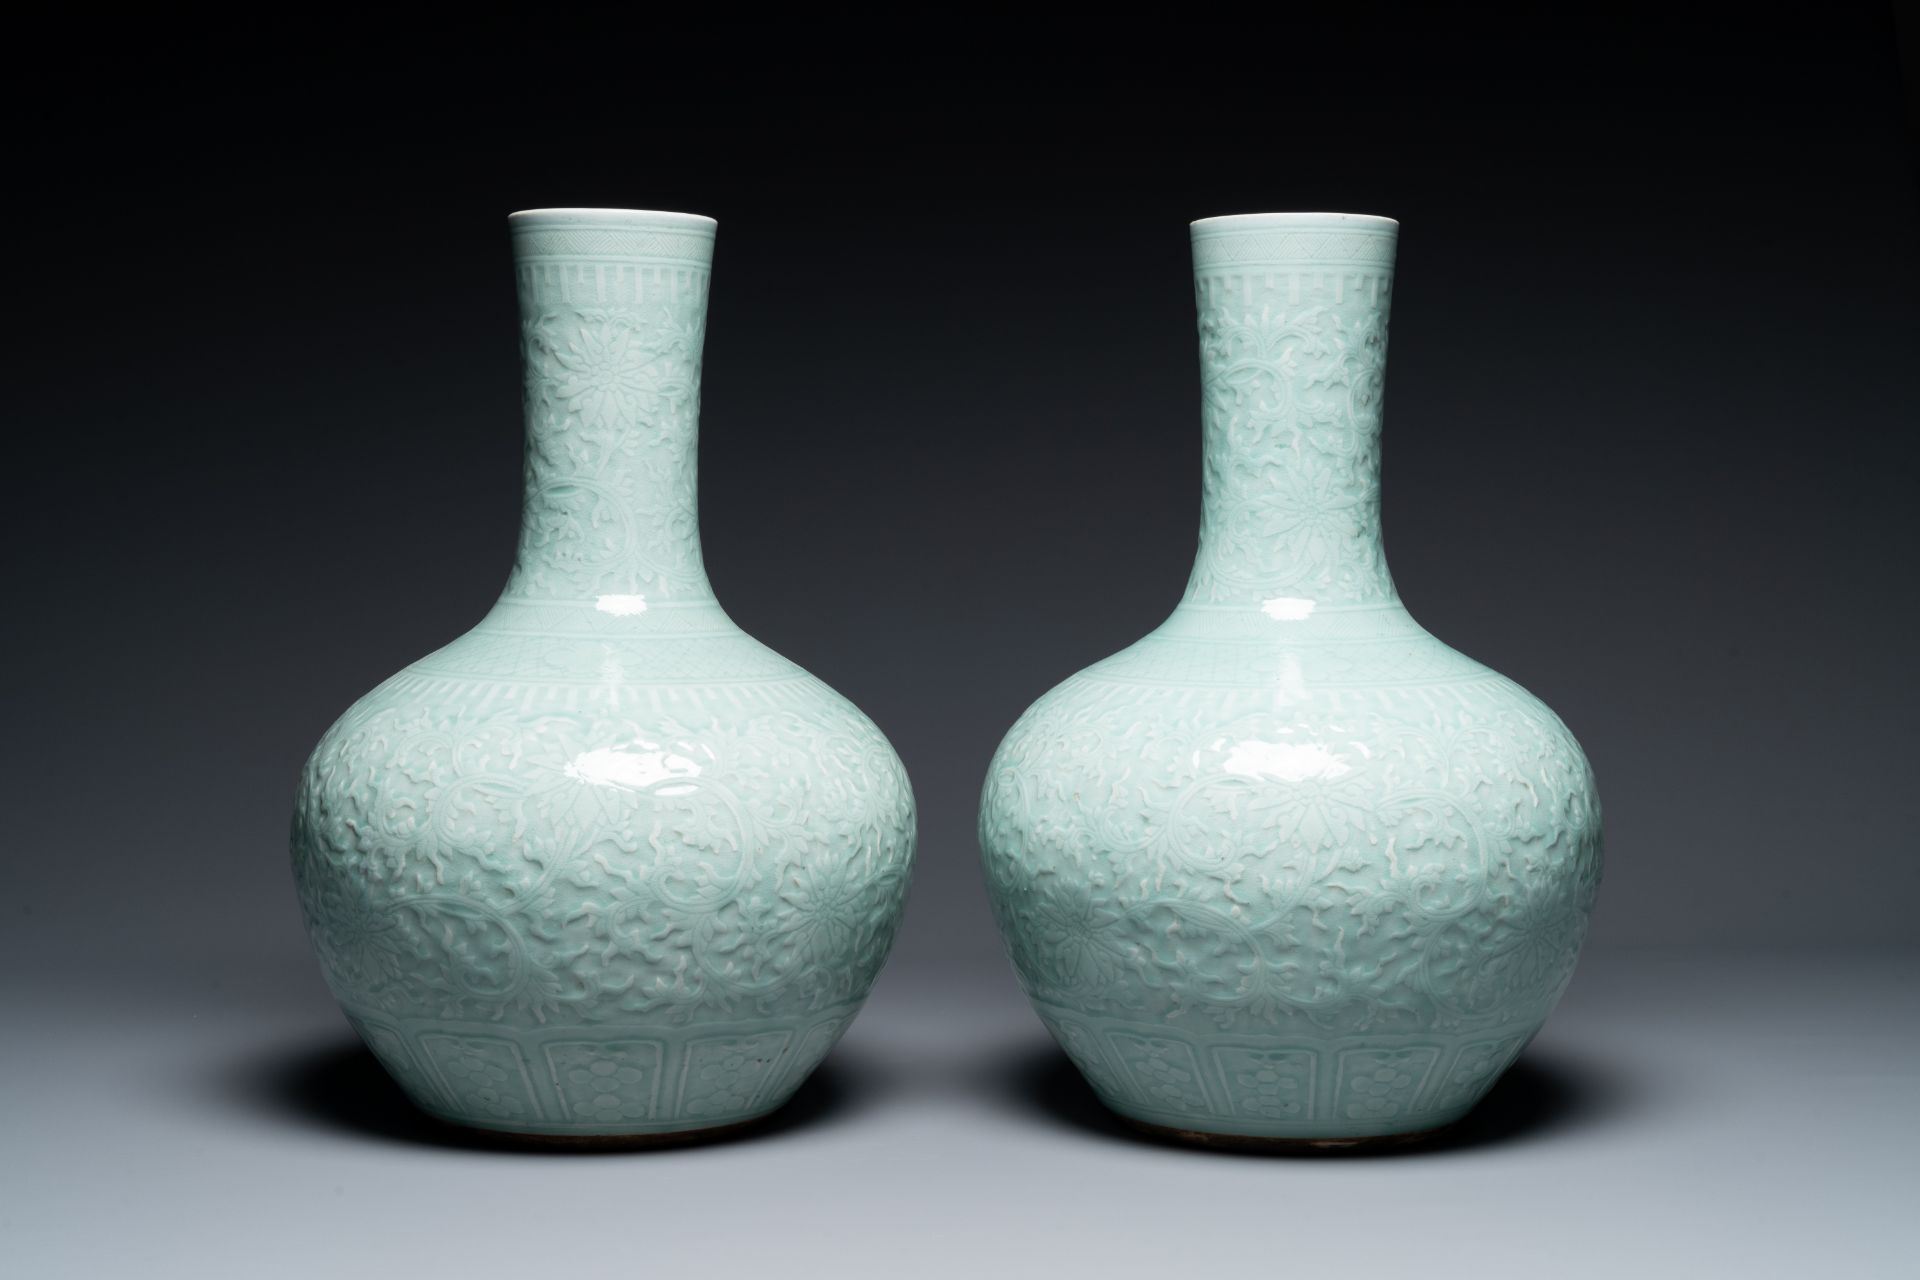 A pair of large Chinese monochrome celadon-glazed anhua 'lotus scrol' bottle vases, 19th C.